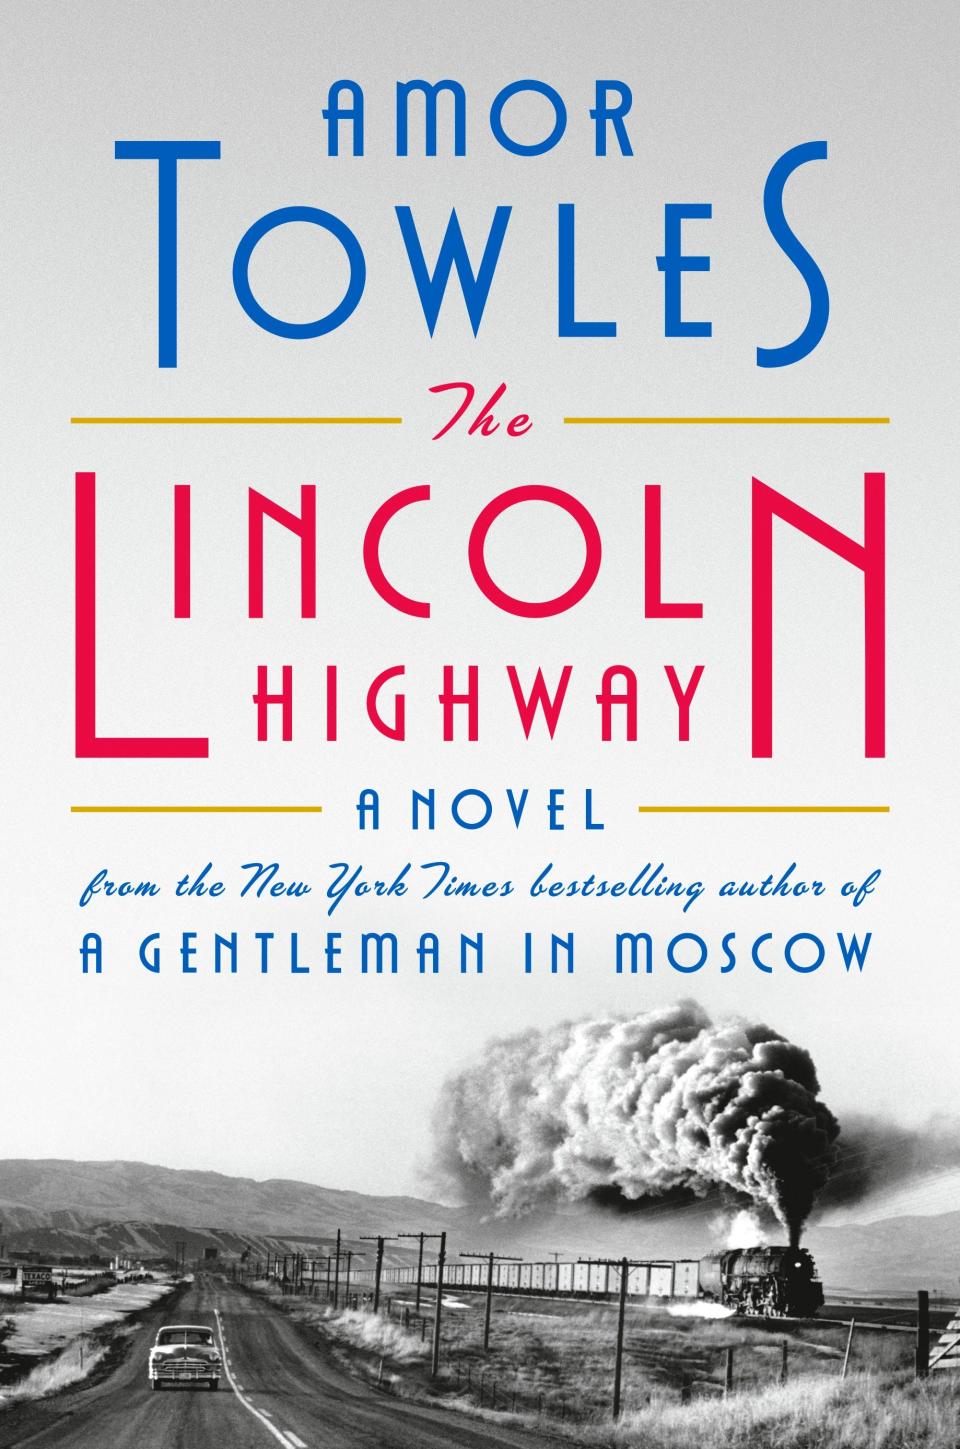 “The Lincoln Highway,” by Amor Towles.